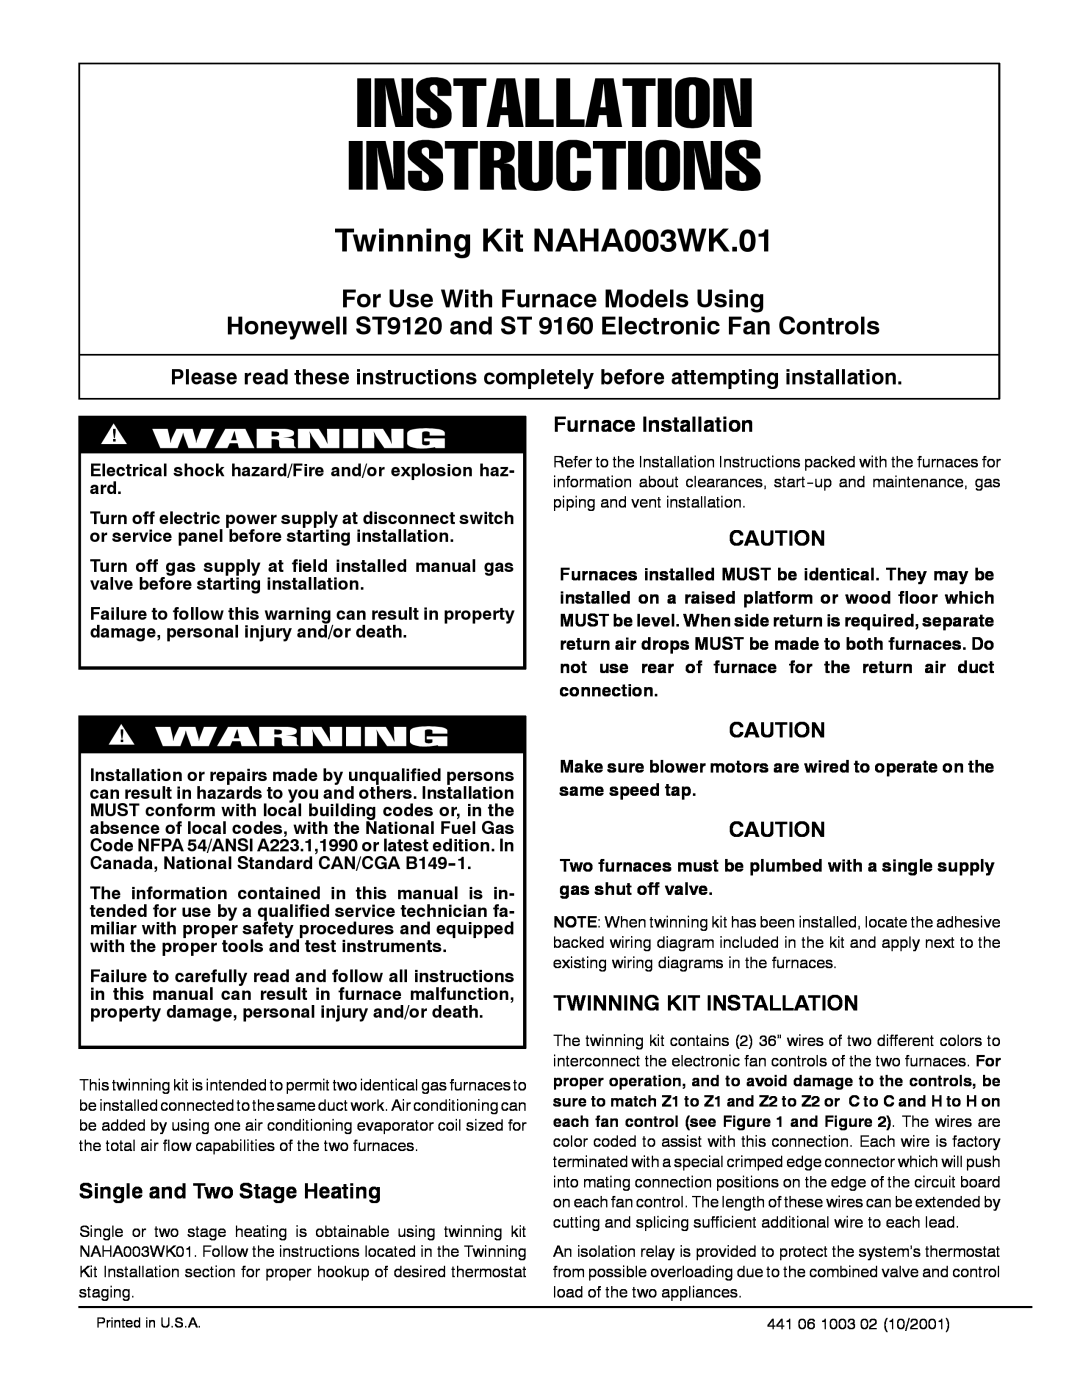 Bryant NAHA003WK.01 installation instructions Furnace Installation, Single and Two Stage Heating 